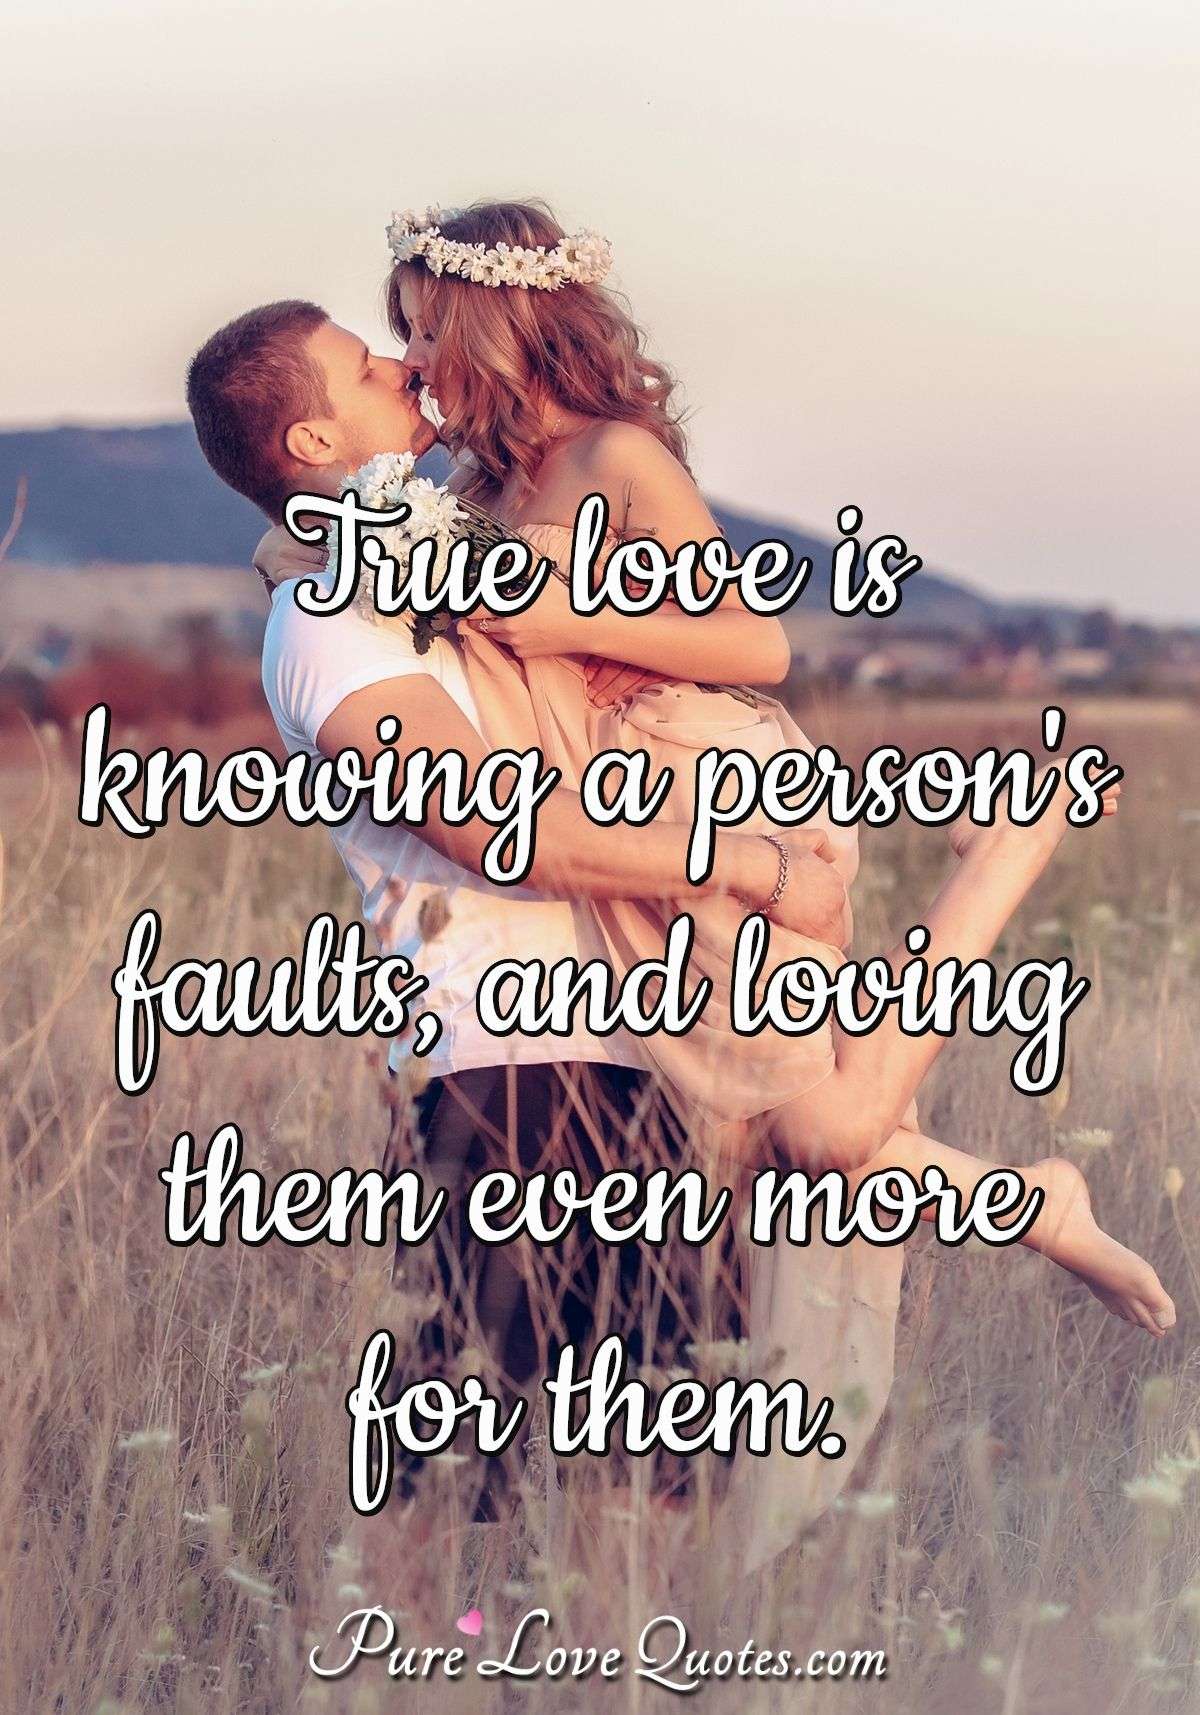 True love is knowing a person's faults, and loving them